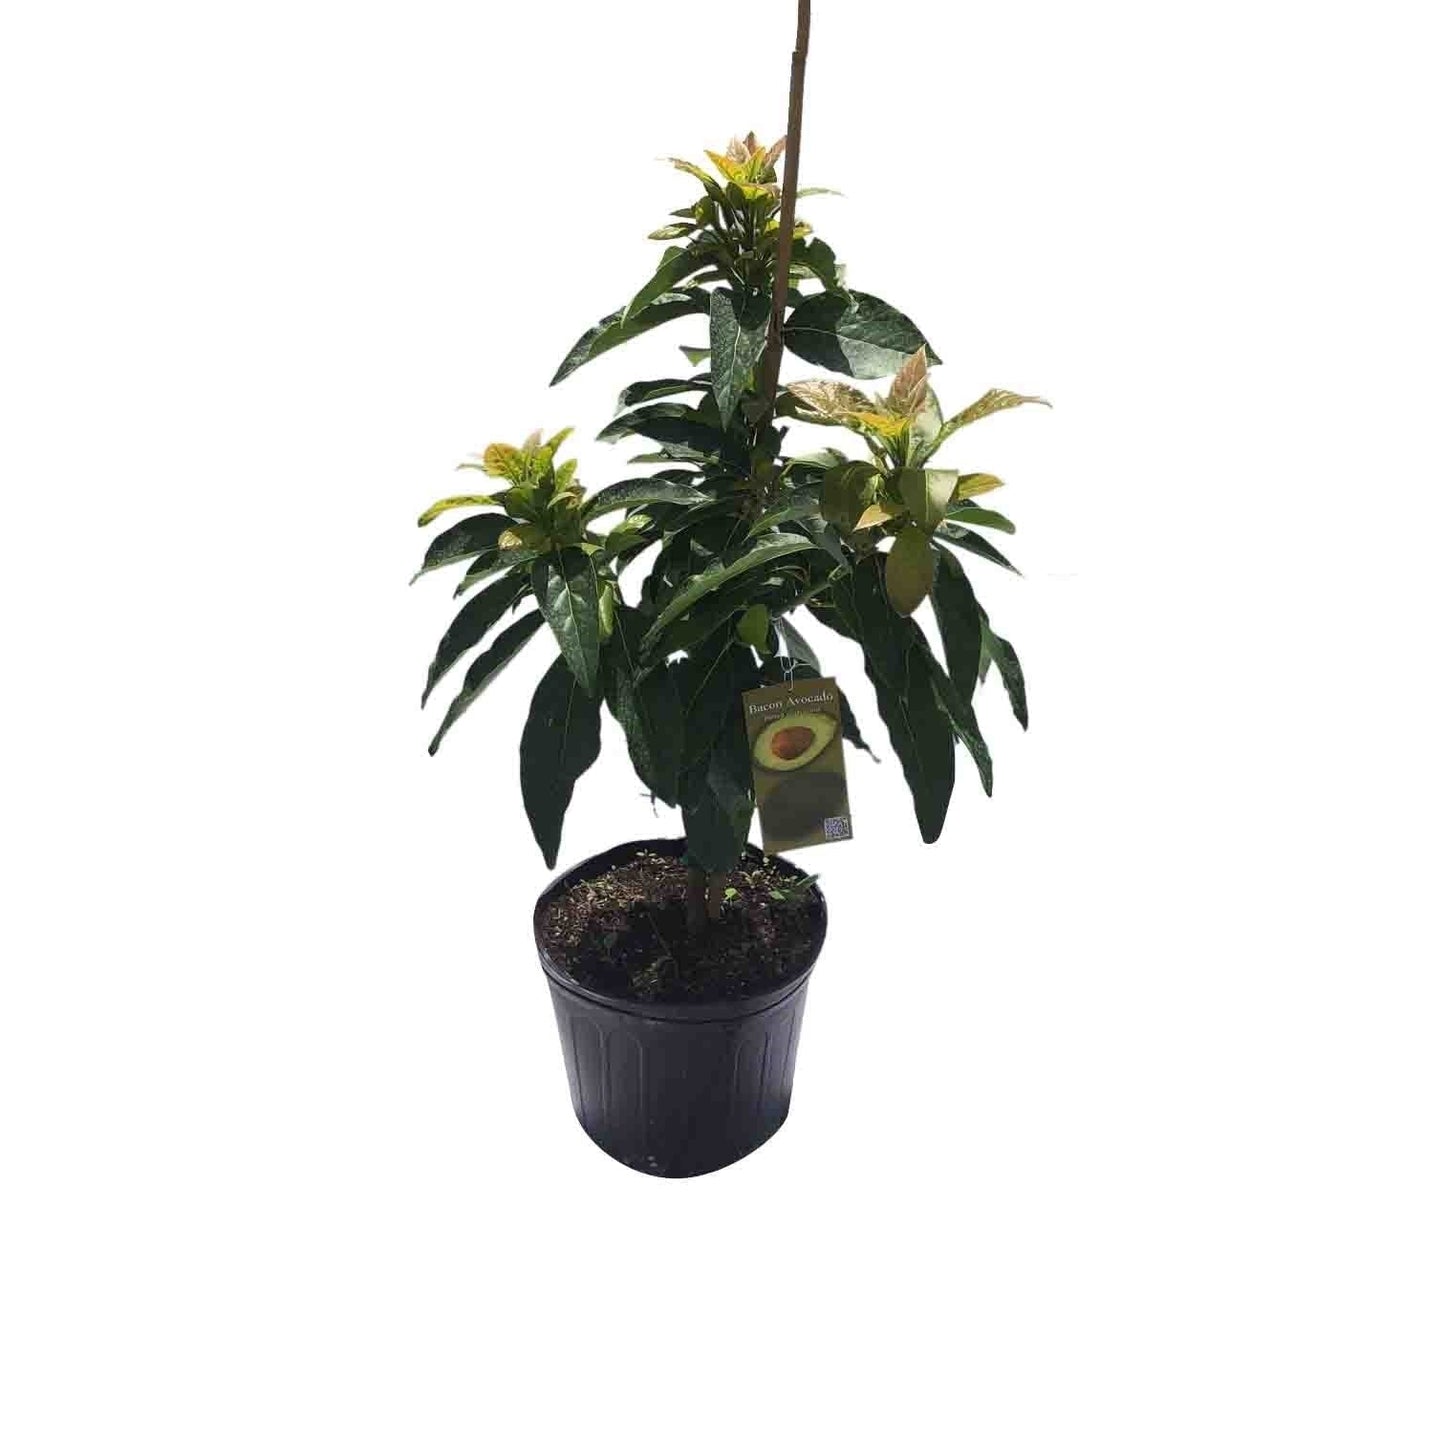 Lila Avocado Tree, Semi-Cold Hardy, Grafted, 3 Gal Container from Florida